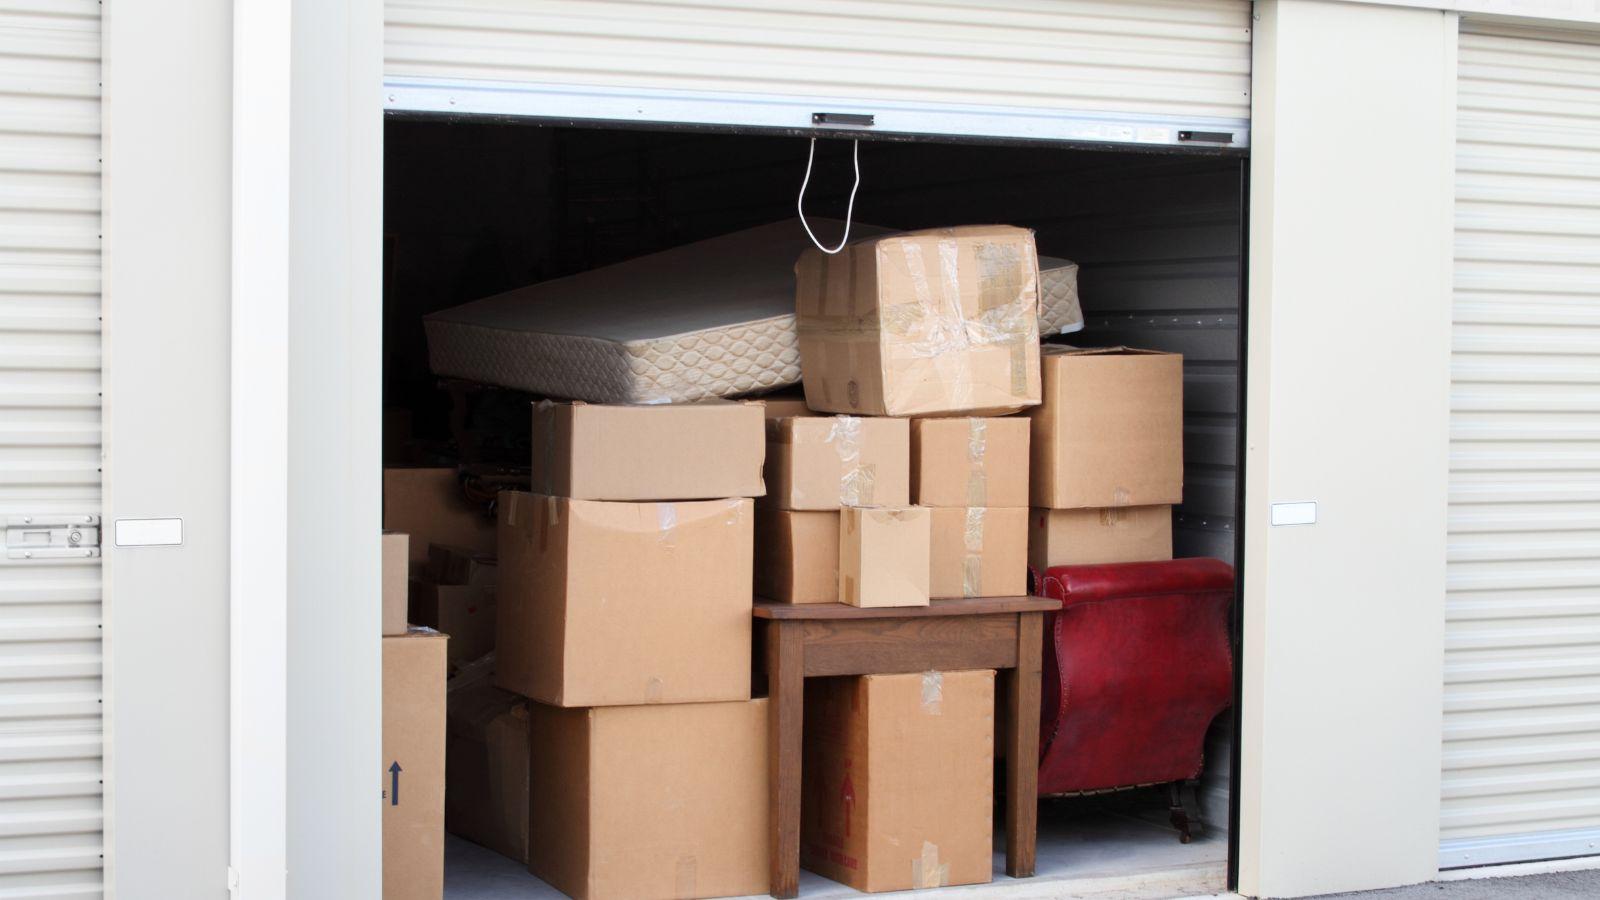 An open storage unit with cardboard boxes stacked inside